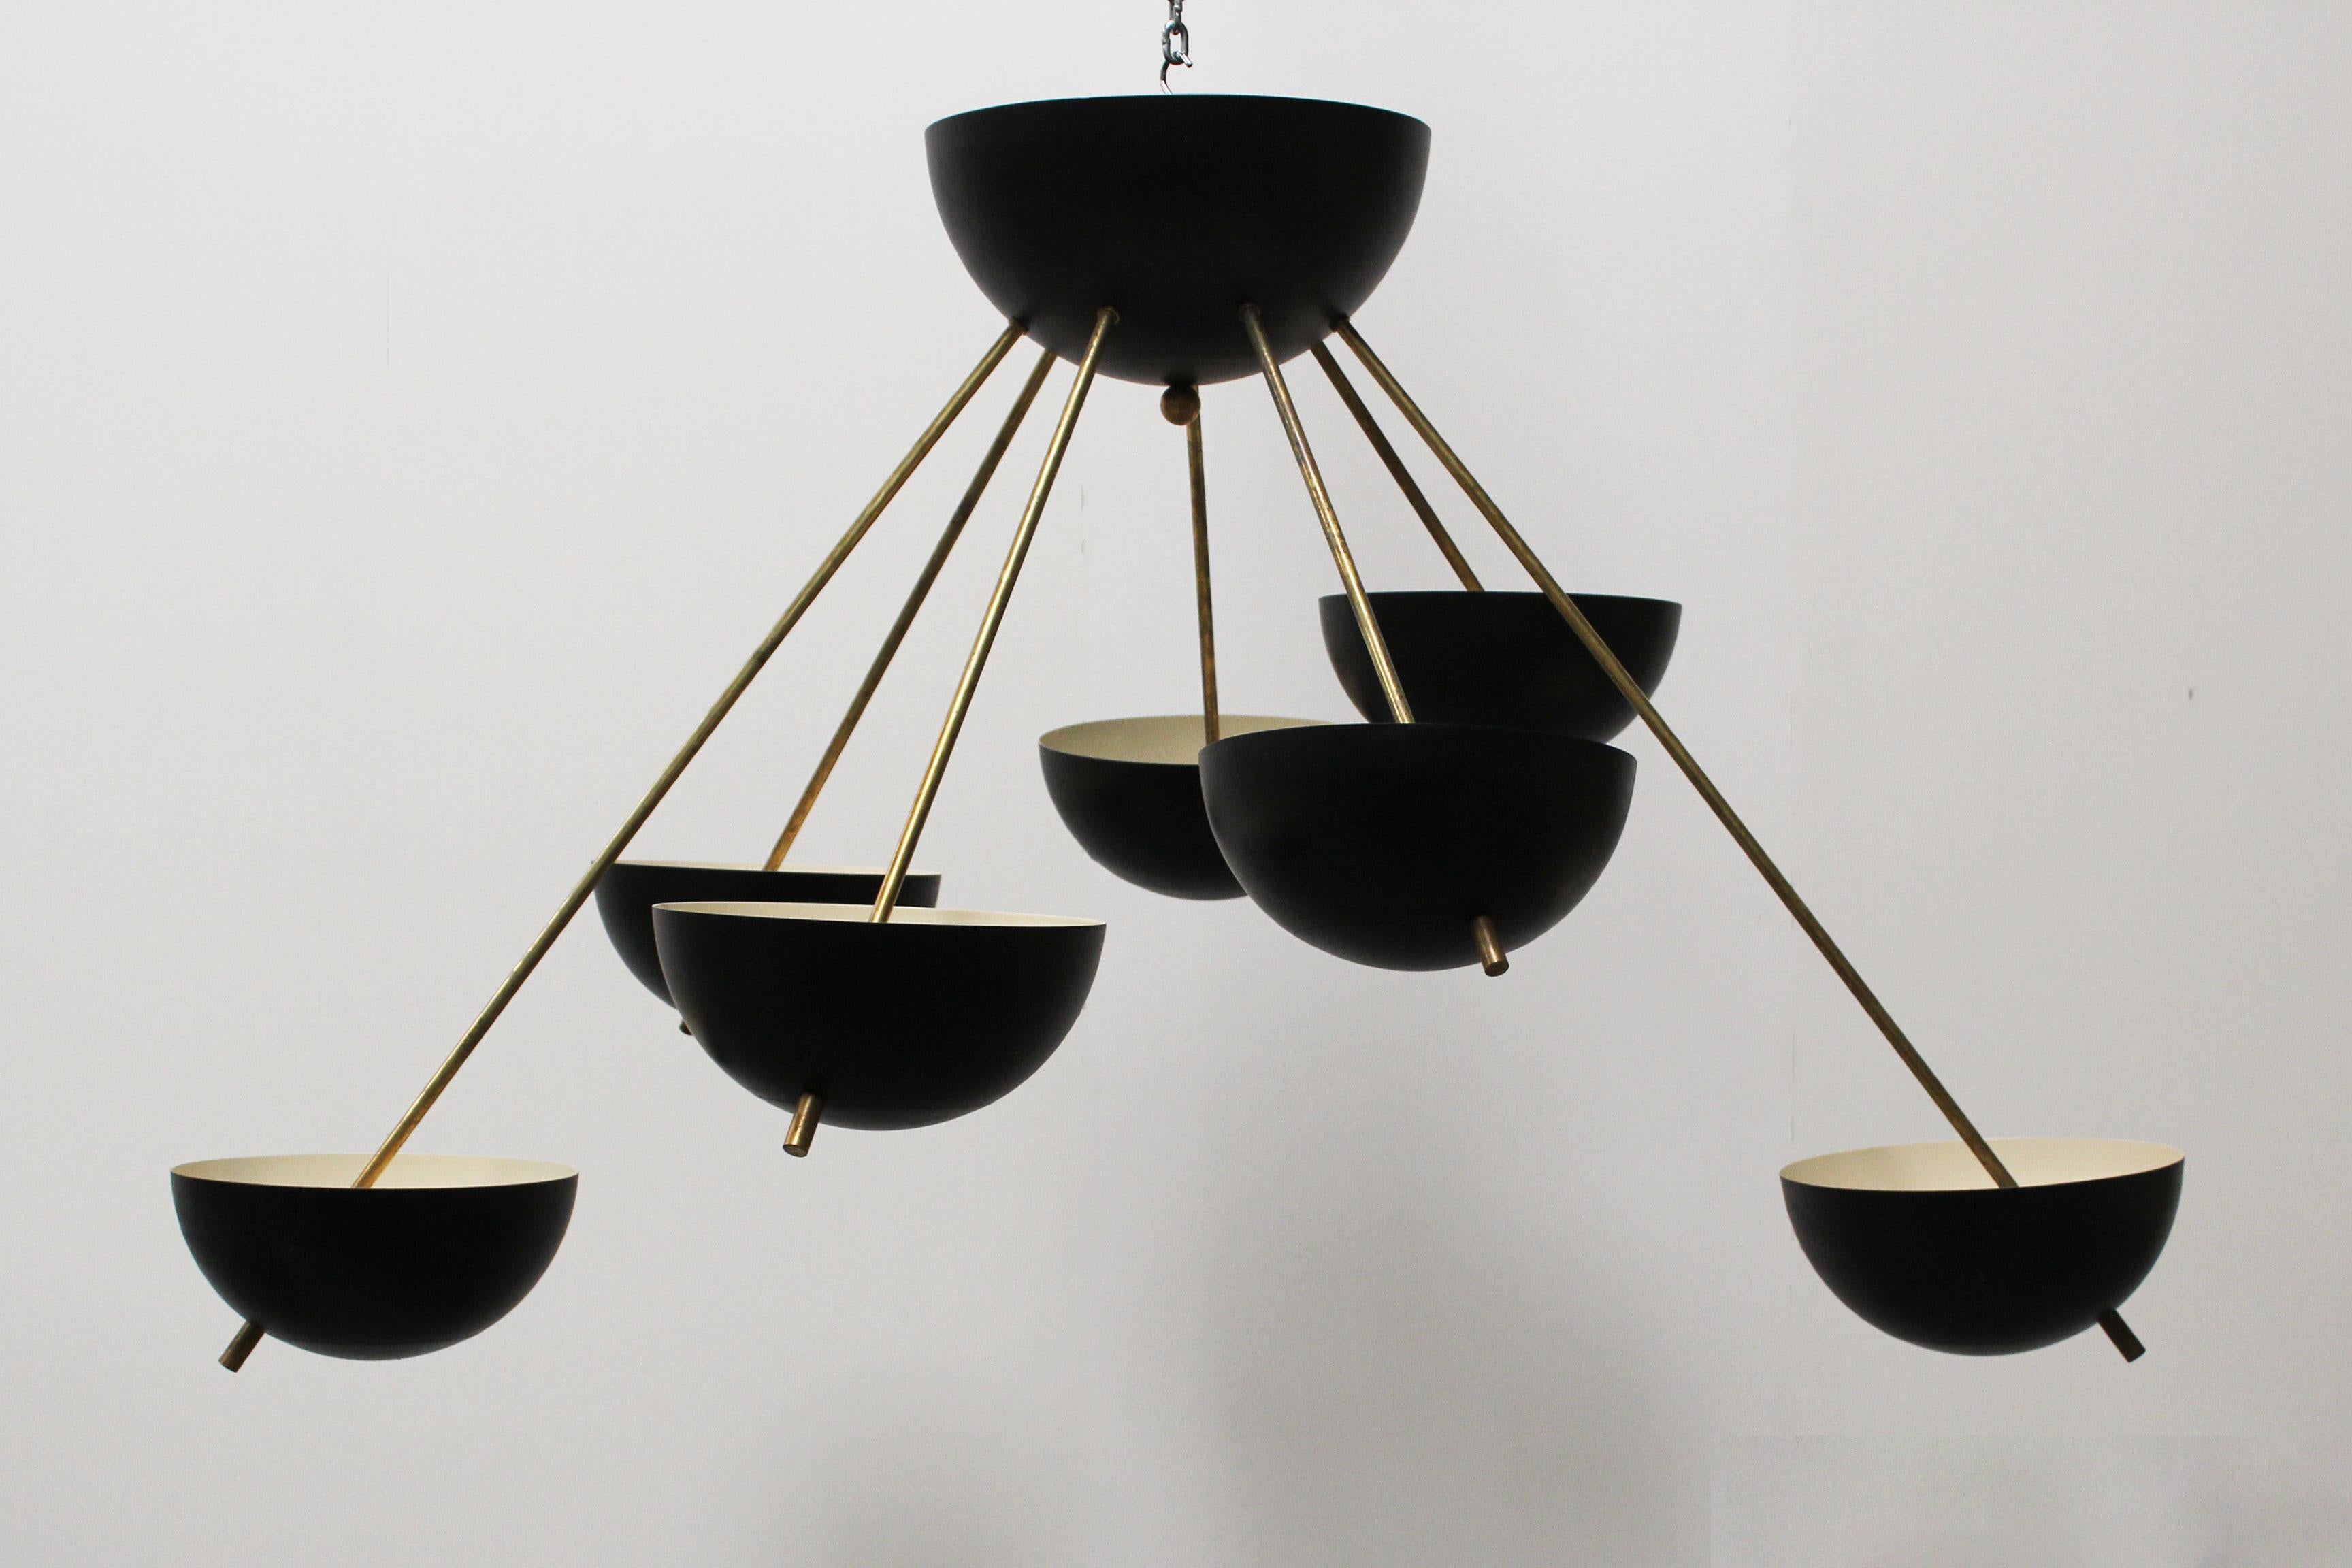 Magnificent midcentury design Sputnik chandelier in design of 1960s Stilnovo
It has a wonderful minimalistic Stilnovo design with lines inspired by the Space Age
The chandelier has seven sockets and is fully rewired. Brass shows small sings of age.